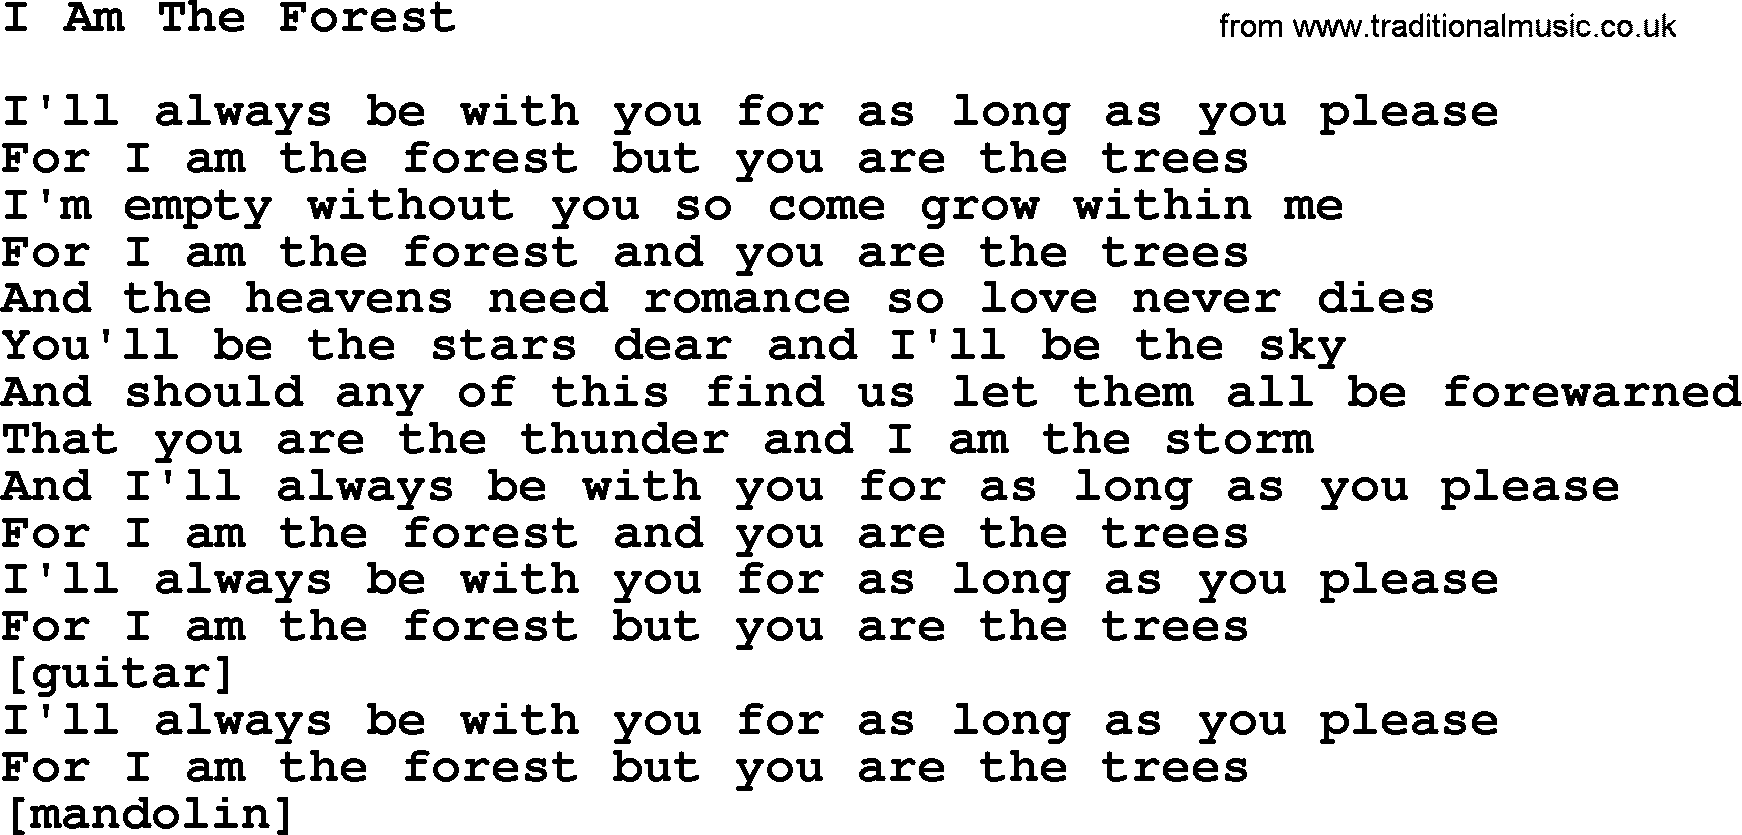 Willie Nelson song: I Am The Forest lyrics